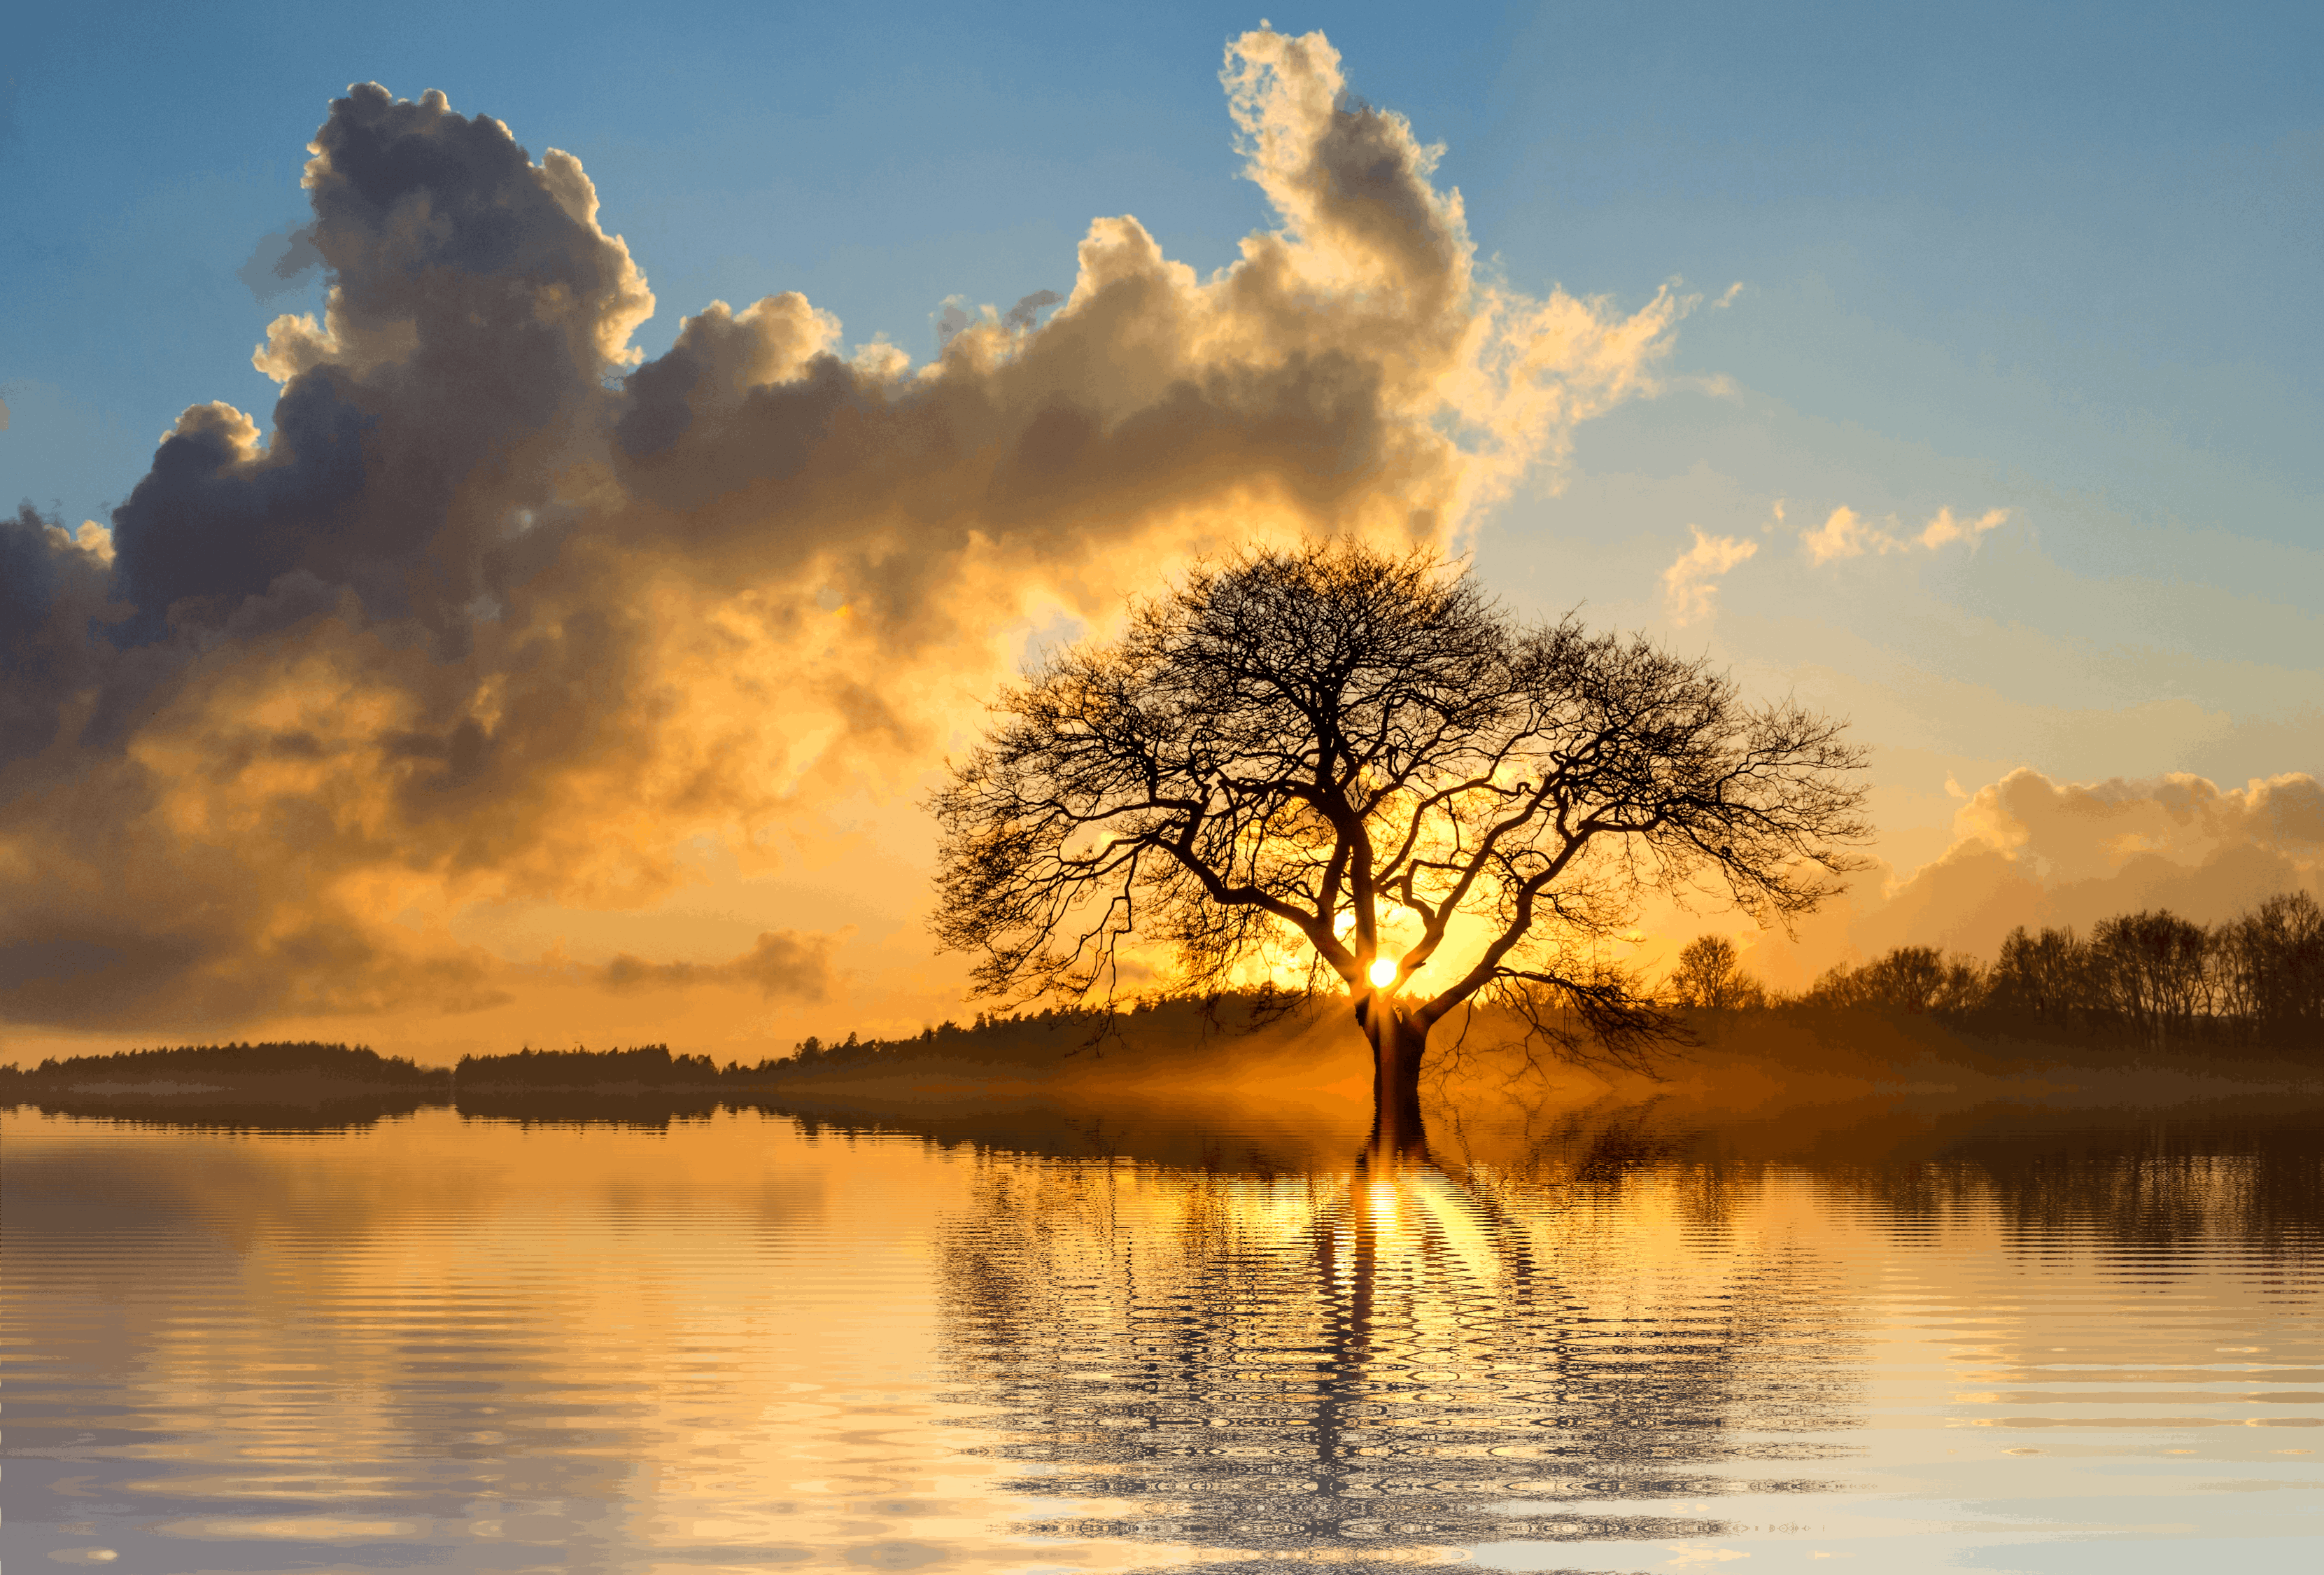 Landscape Photography Of Tree And Body Of Water · Free Stock Photo